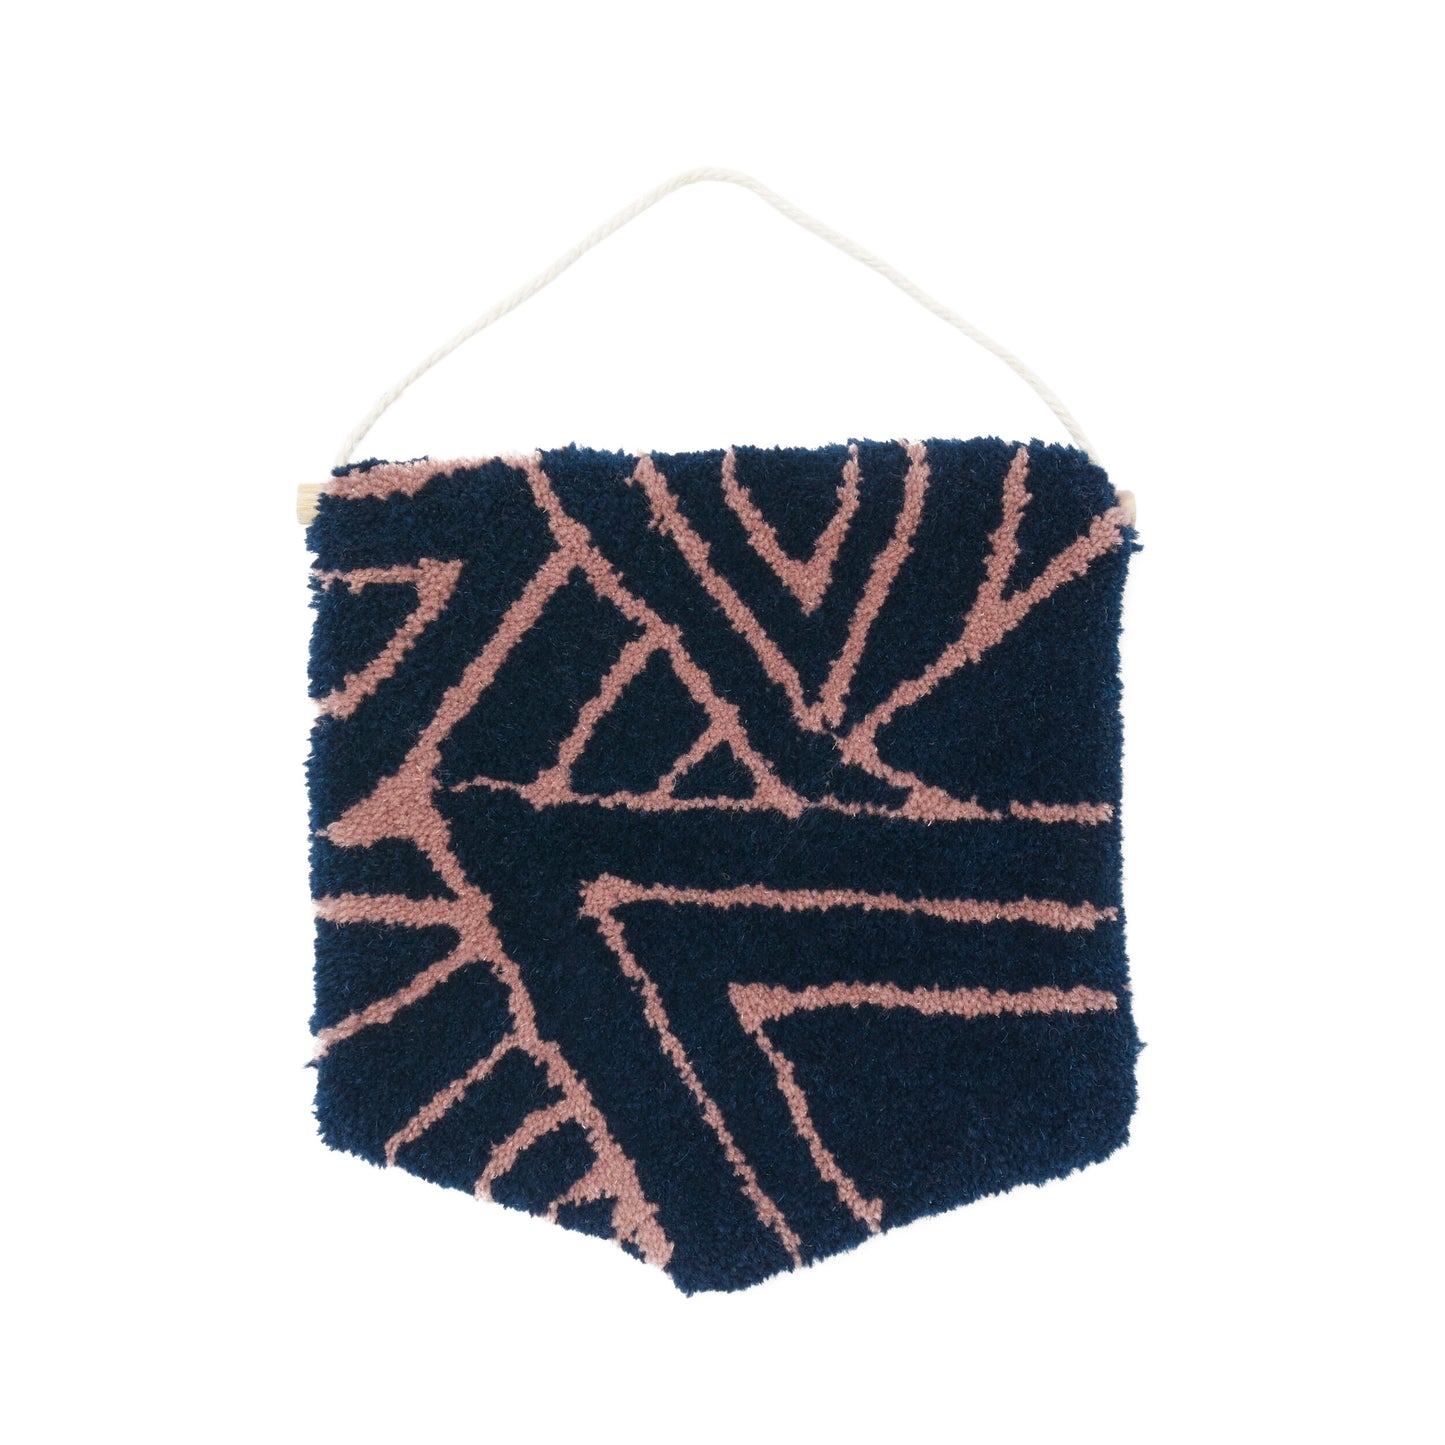 Navy cut pile wall hanging with lilac accents in a contemporary triangular design. Made using reclaimed yarns.